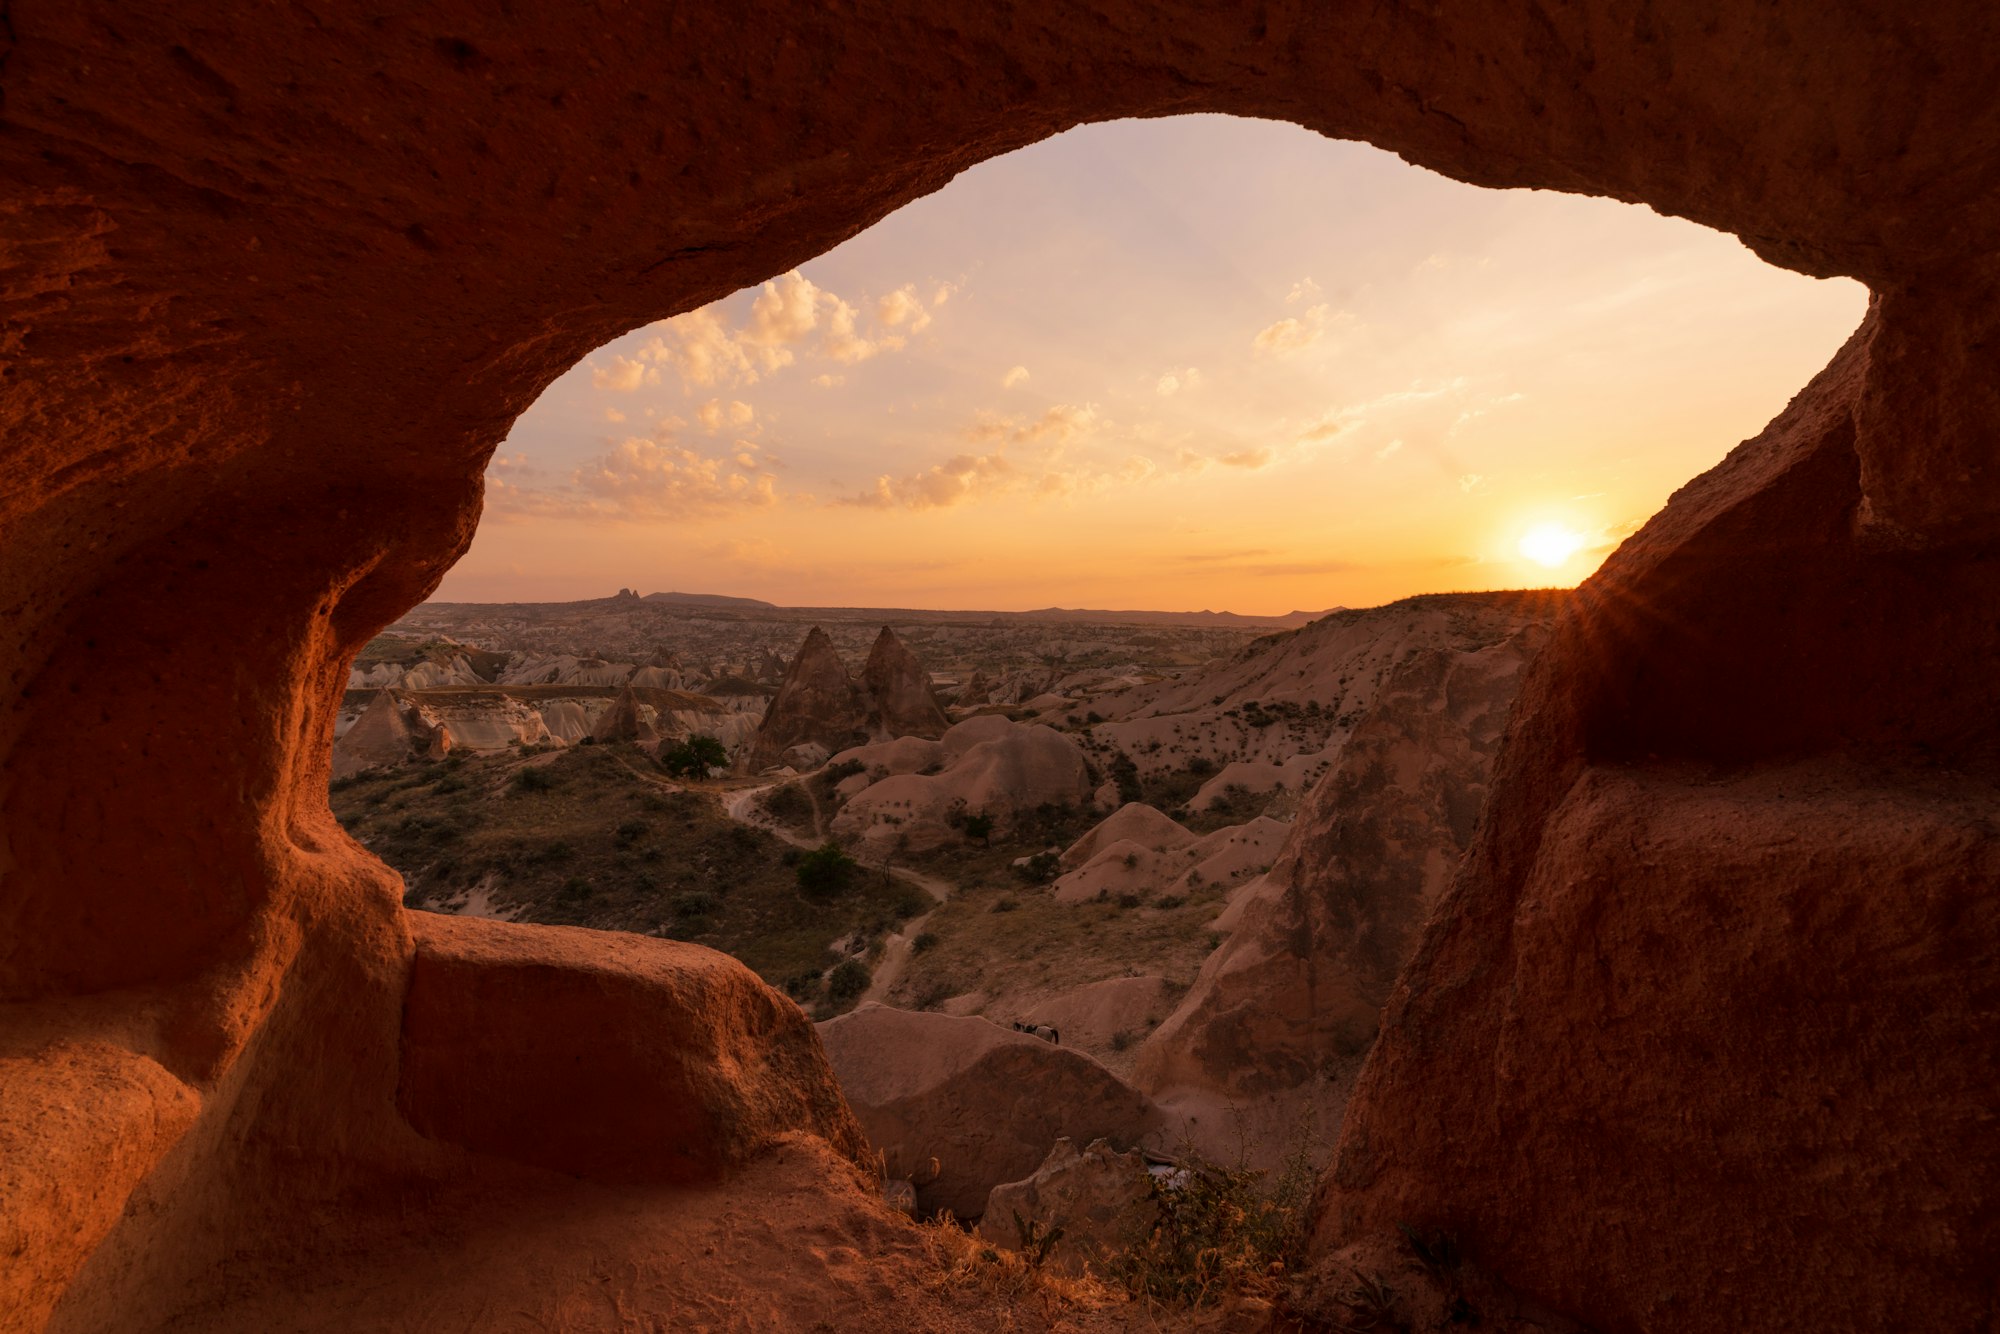 Sunset over Cappadocia from Rose Valley